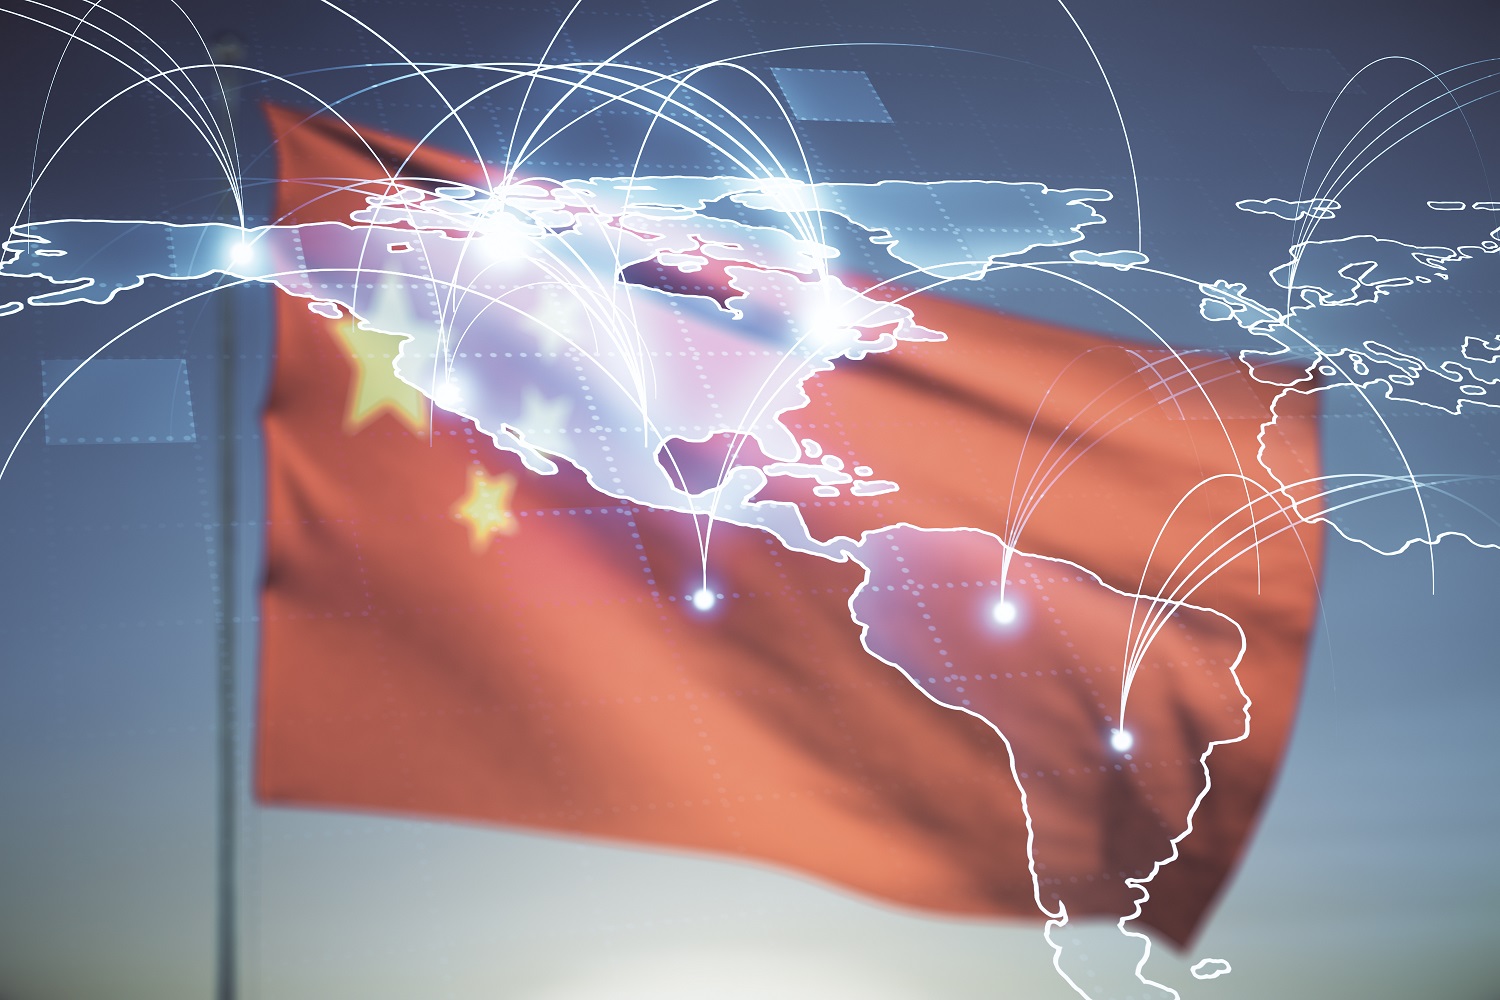 An abstract digital world map hologram against the background of the Chinese flag, mounted to a flagpole.